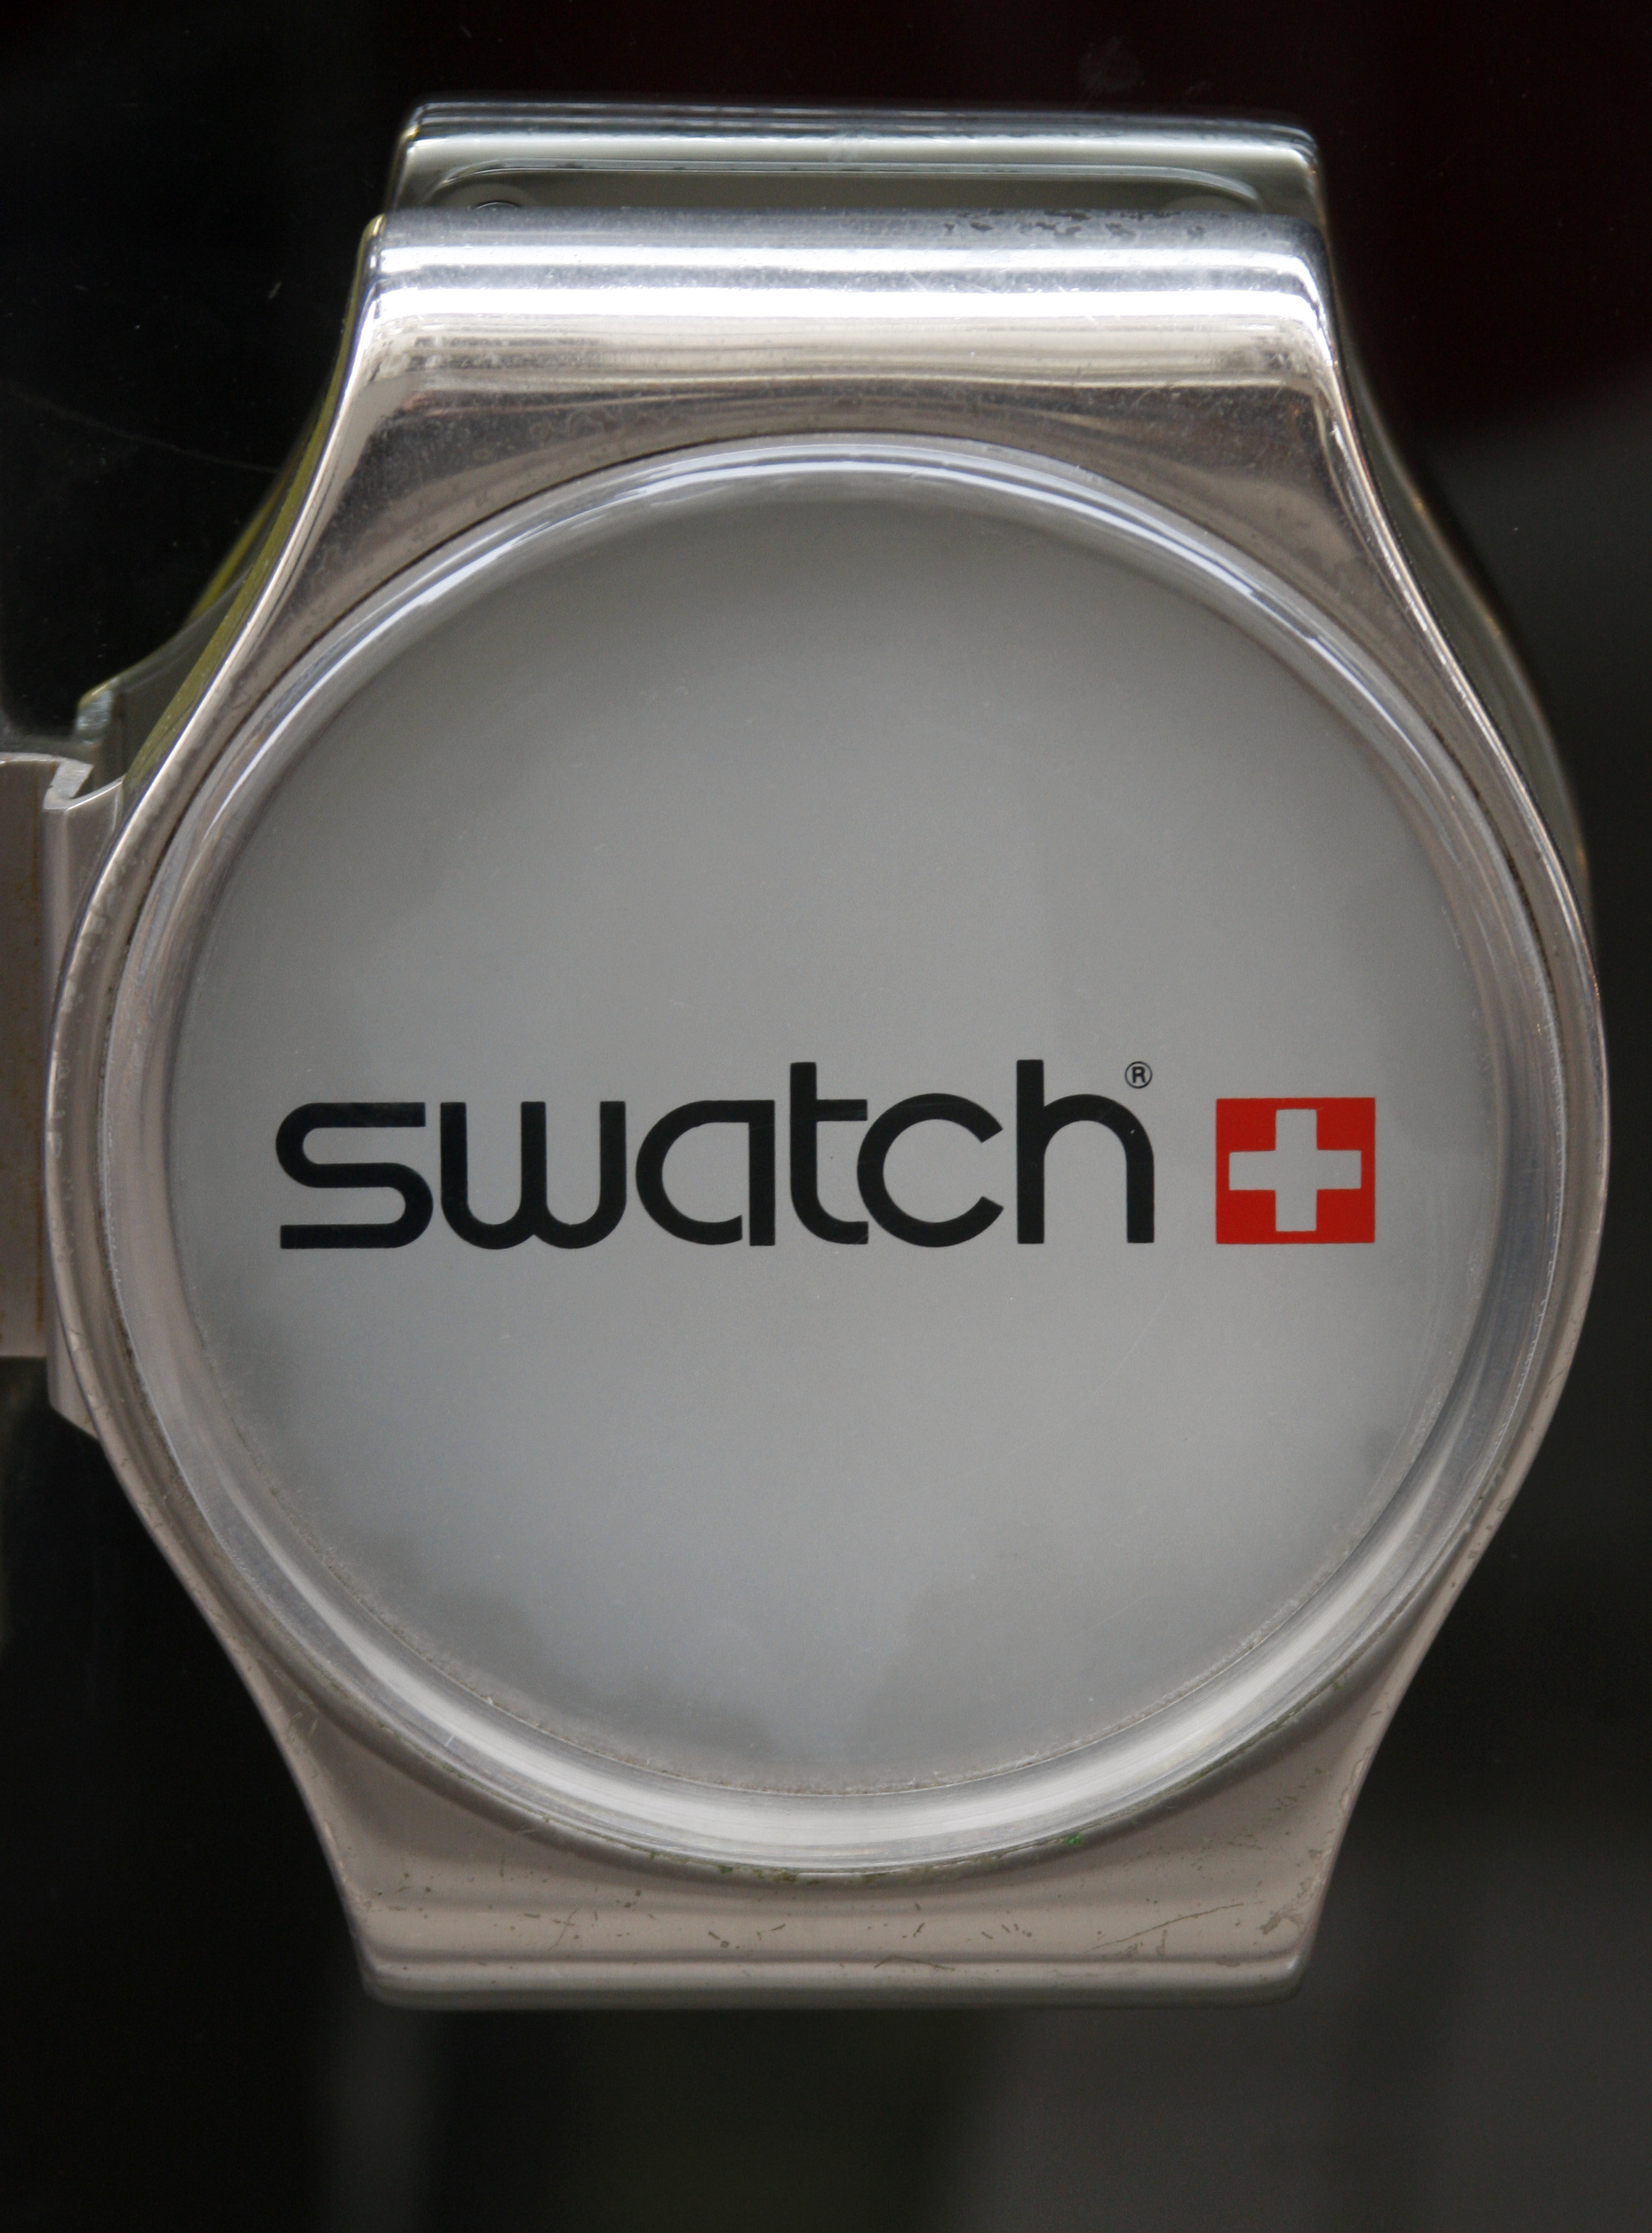 The logo of Swiss watchmaker Swatch is seen on the door of a Swatch watches shop in Strasbourg on March 12, 2009. (Vincent Kessler—Reuters)